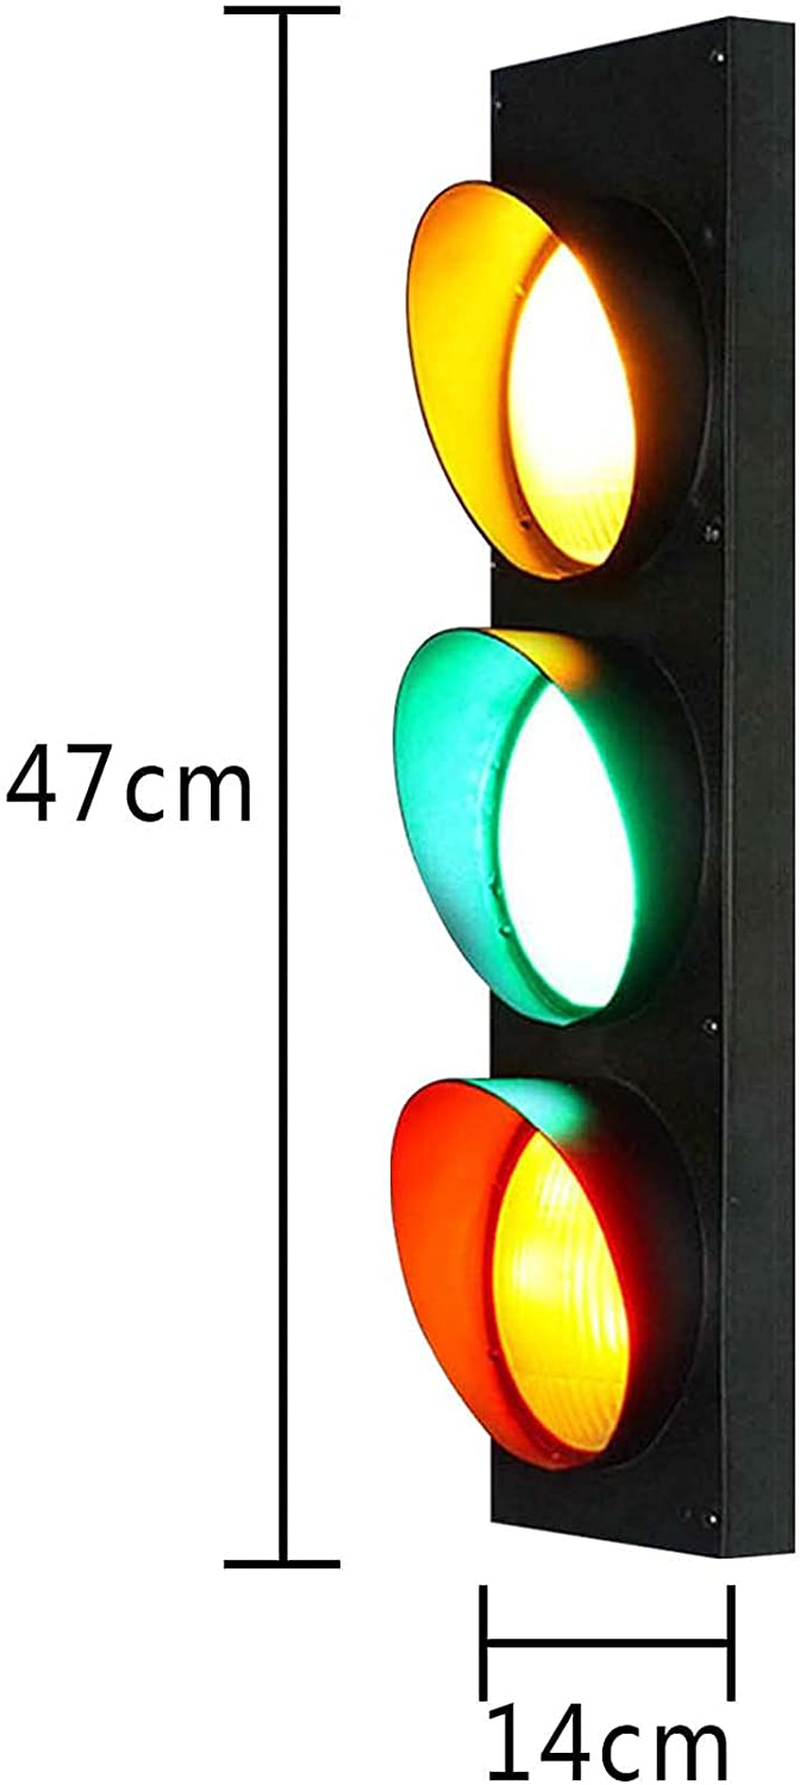 Remote Control Wall Light with Switch and U.S. Plug, Traffic Light Dimmable LED Wall Lamp Retro Industrial Traffic Lamp 5Wx3 Indicator Light Blinking Decoration Lights for Kids Bedrooms